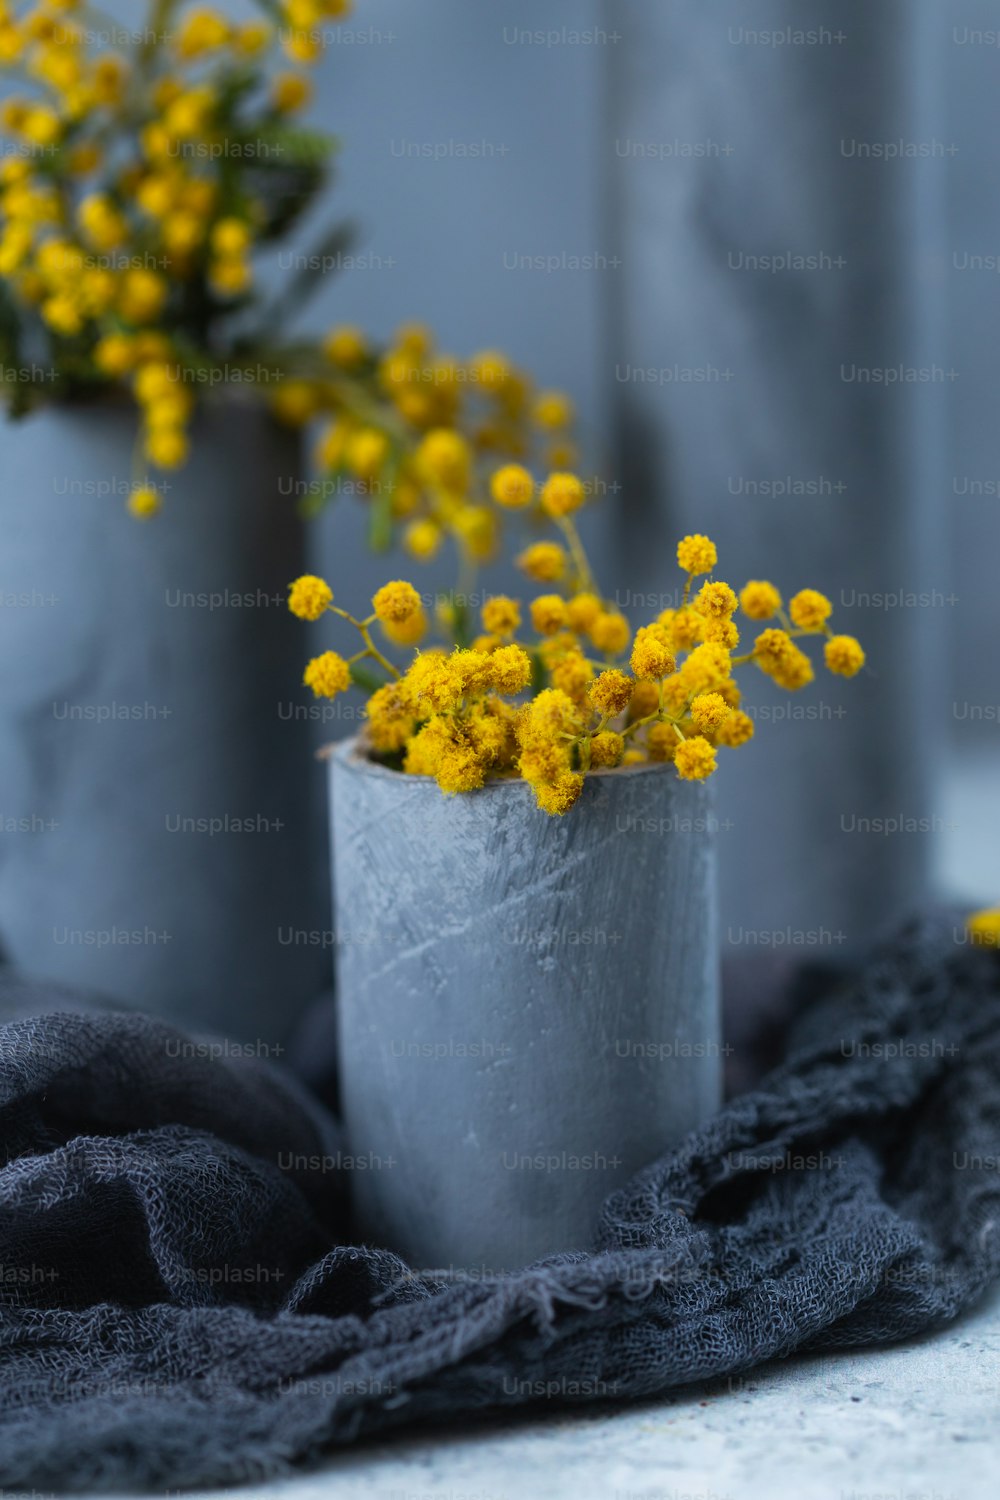 a couple of vases filled with yellow flowers